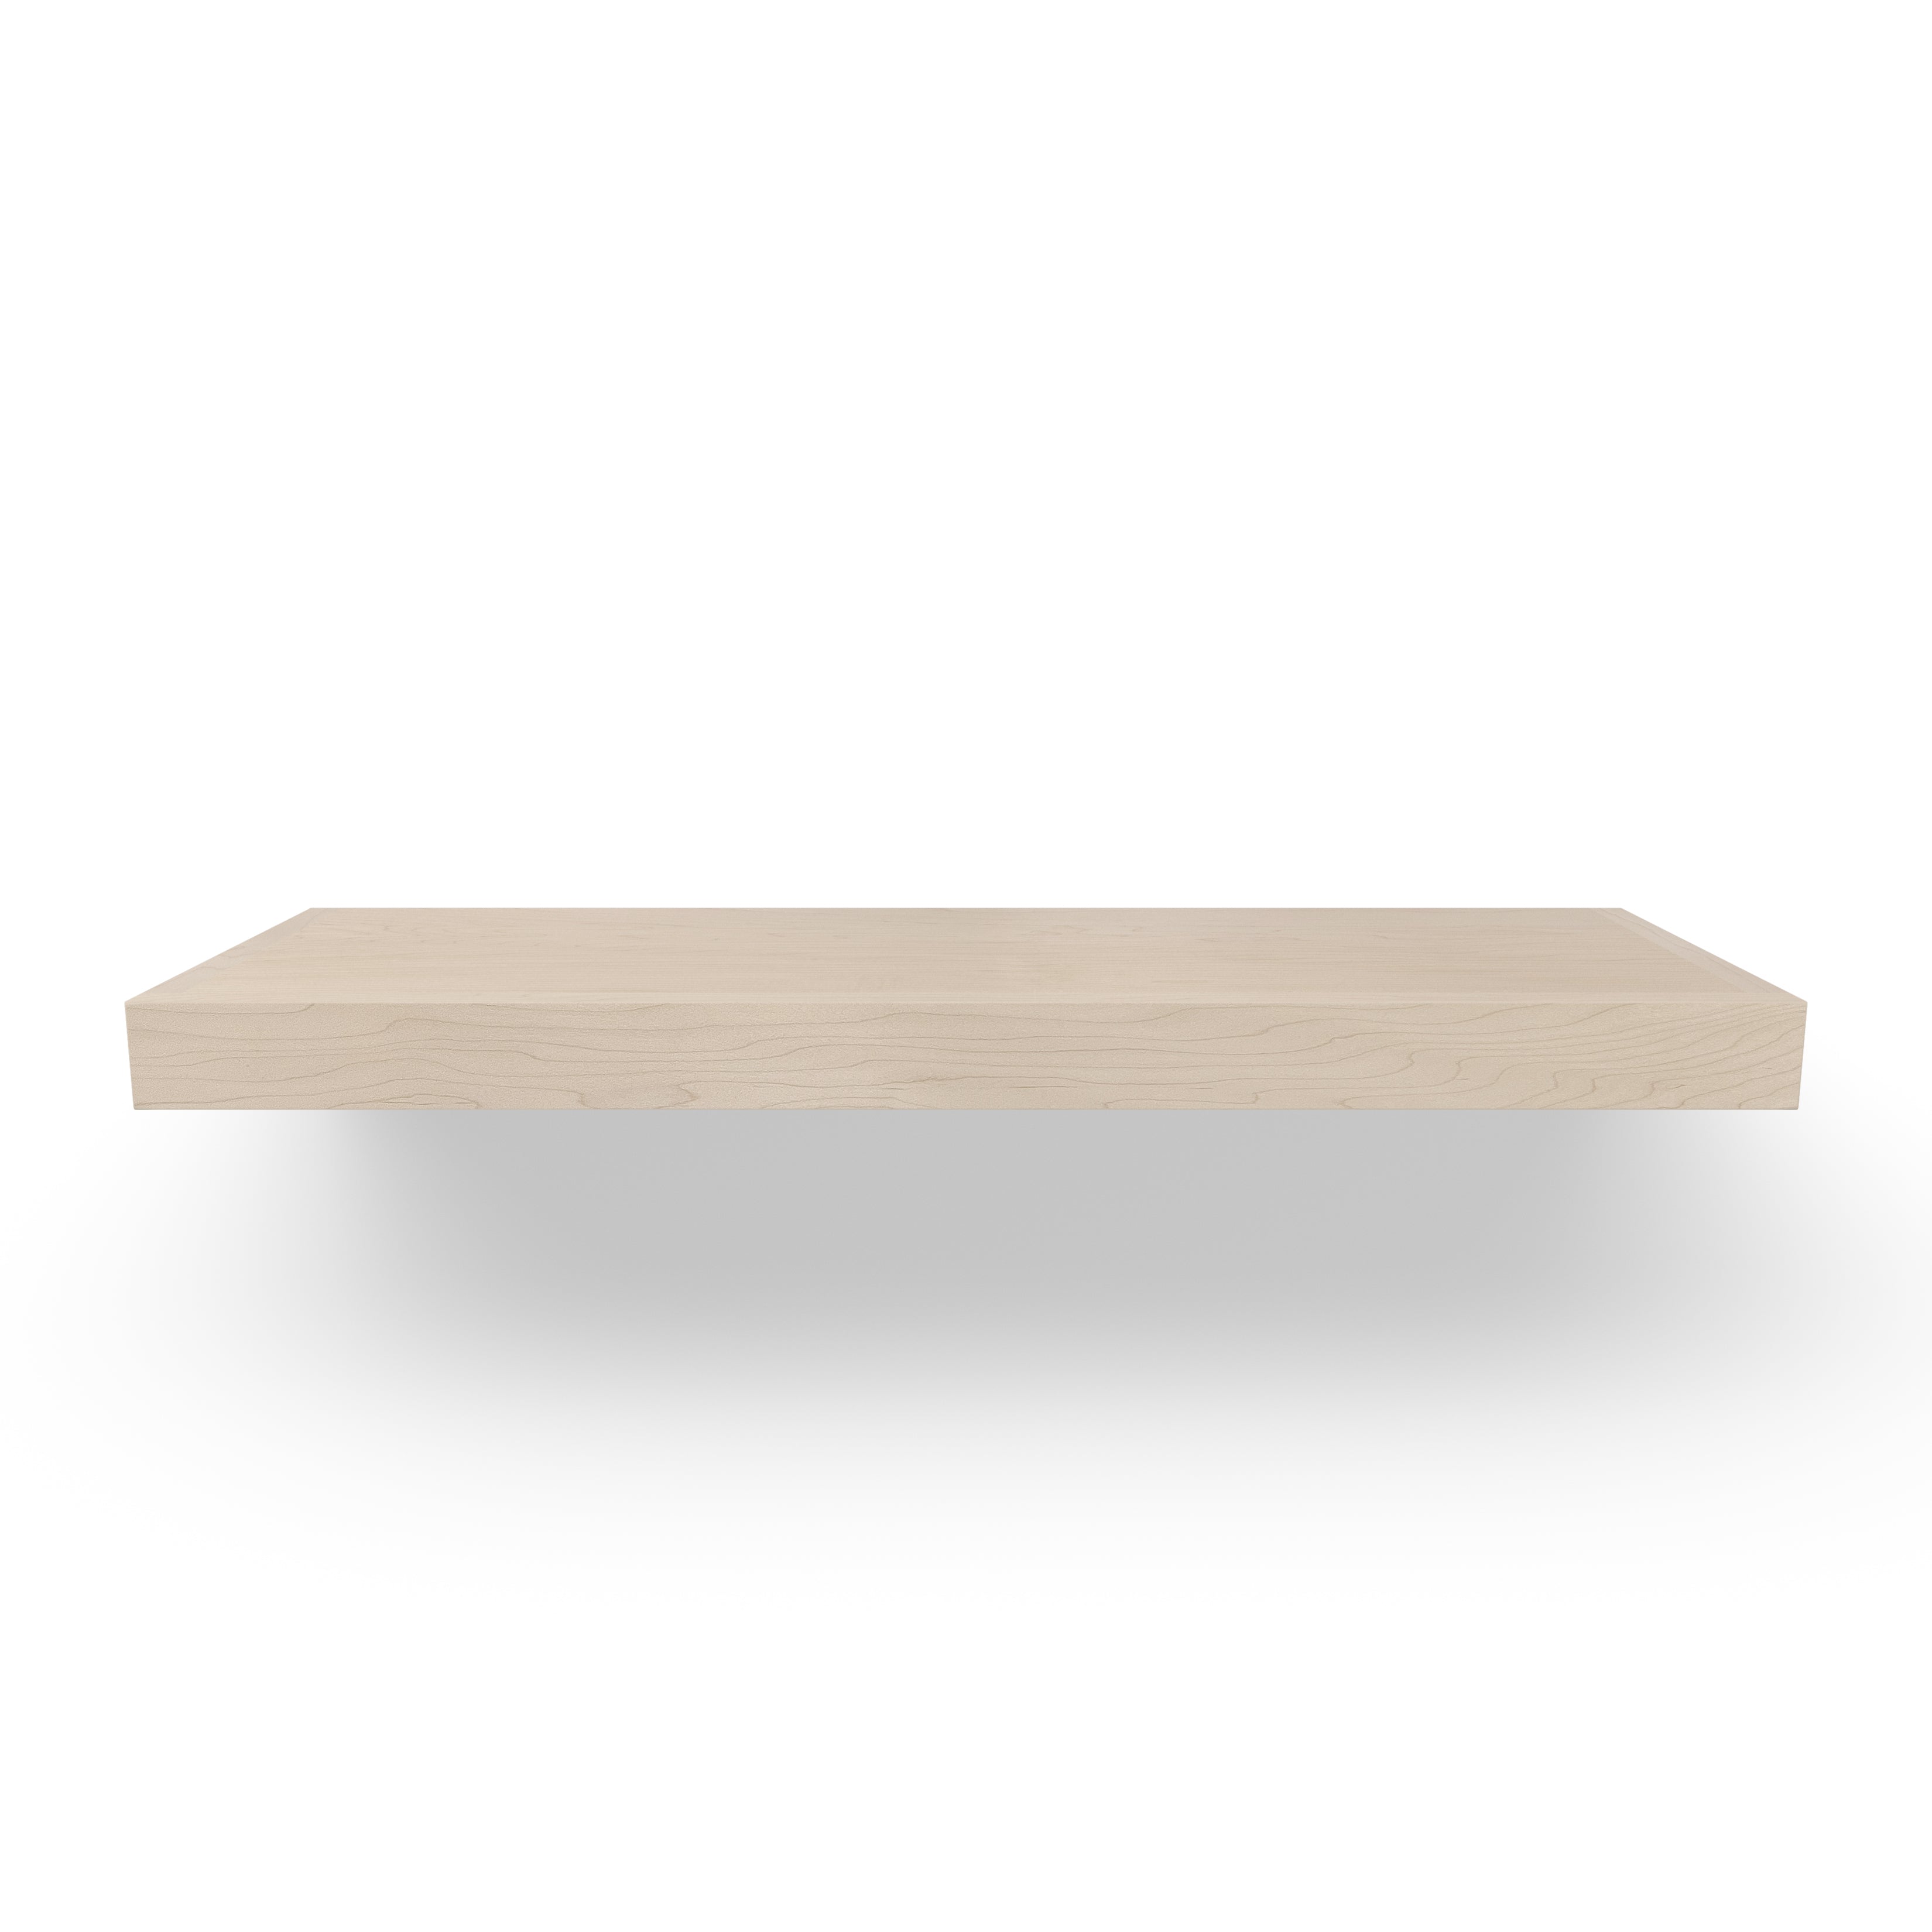 Maple 2 inch Thick Floating Shelf